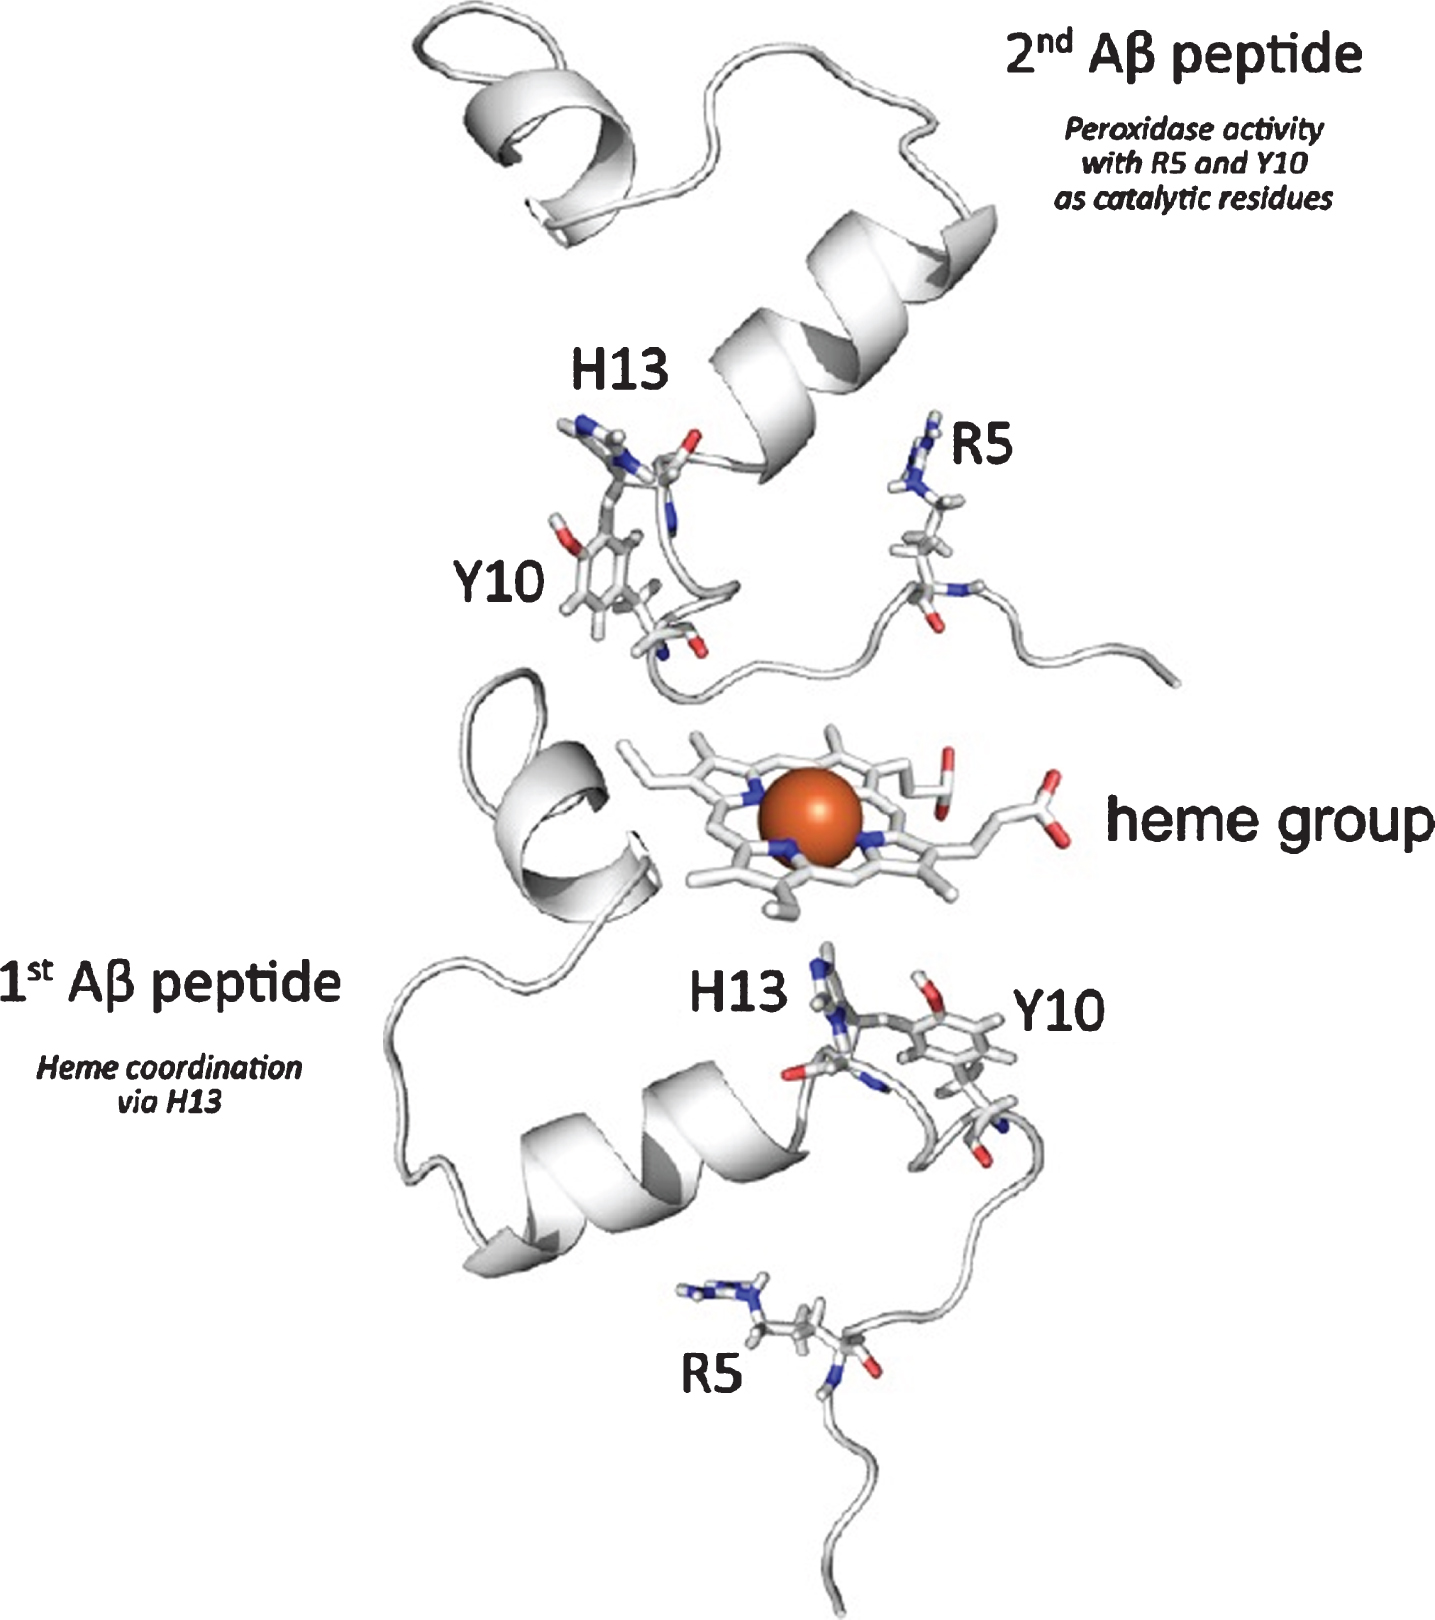 Schematic presentation of amyloid β (Aβ)-heme complex formation based on published investigations on the complexation of free heme by Aβ. Interaction is proposed to mainly take place between heme and the N-terminal part of the peptide. While one peptide is mainly involved in the coordination of the heme iron at the distal heme site via H13, a second peptide may coordinate at the proximal heme site to provide R5 and Y10, which are responsible for the subsequent peroxidase activity of the complex. Collected from [72].